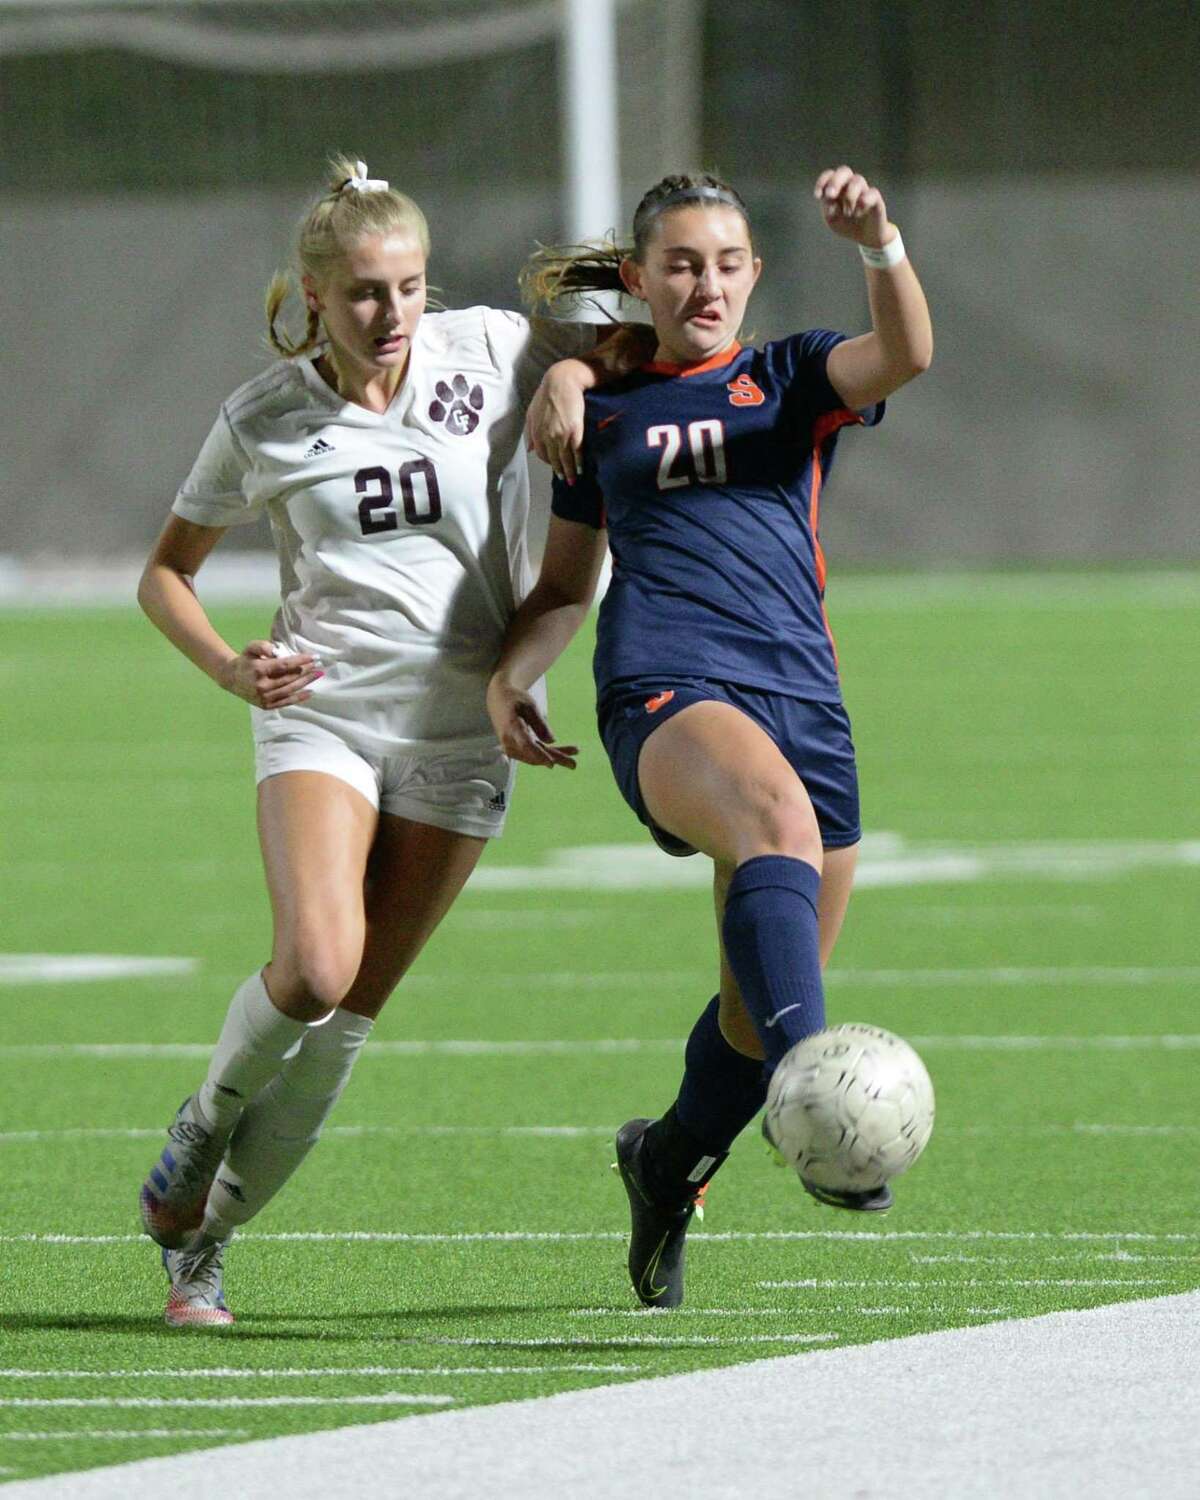 Ava Drouin (20) of Cy-Fair attempts to retrieve the ball during the second half of a 6A-III regional quarterfinal soccer match between the Seven Lakes Spartans and the Cy-Fair Bobcats on Friday, April 2, 2021 at Rhodes Stadium, Katy, TX.